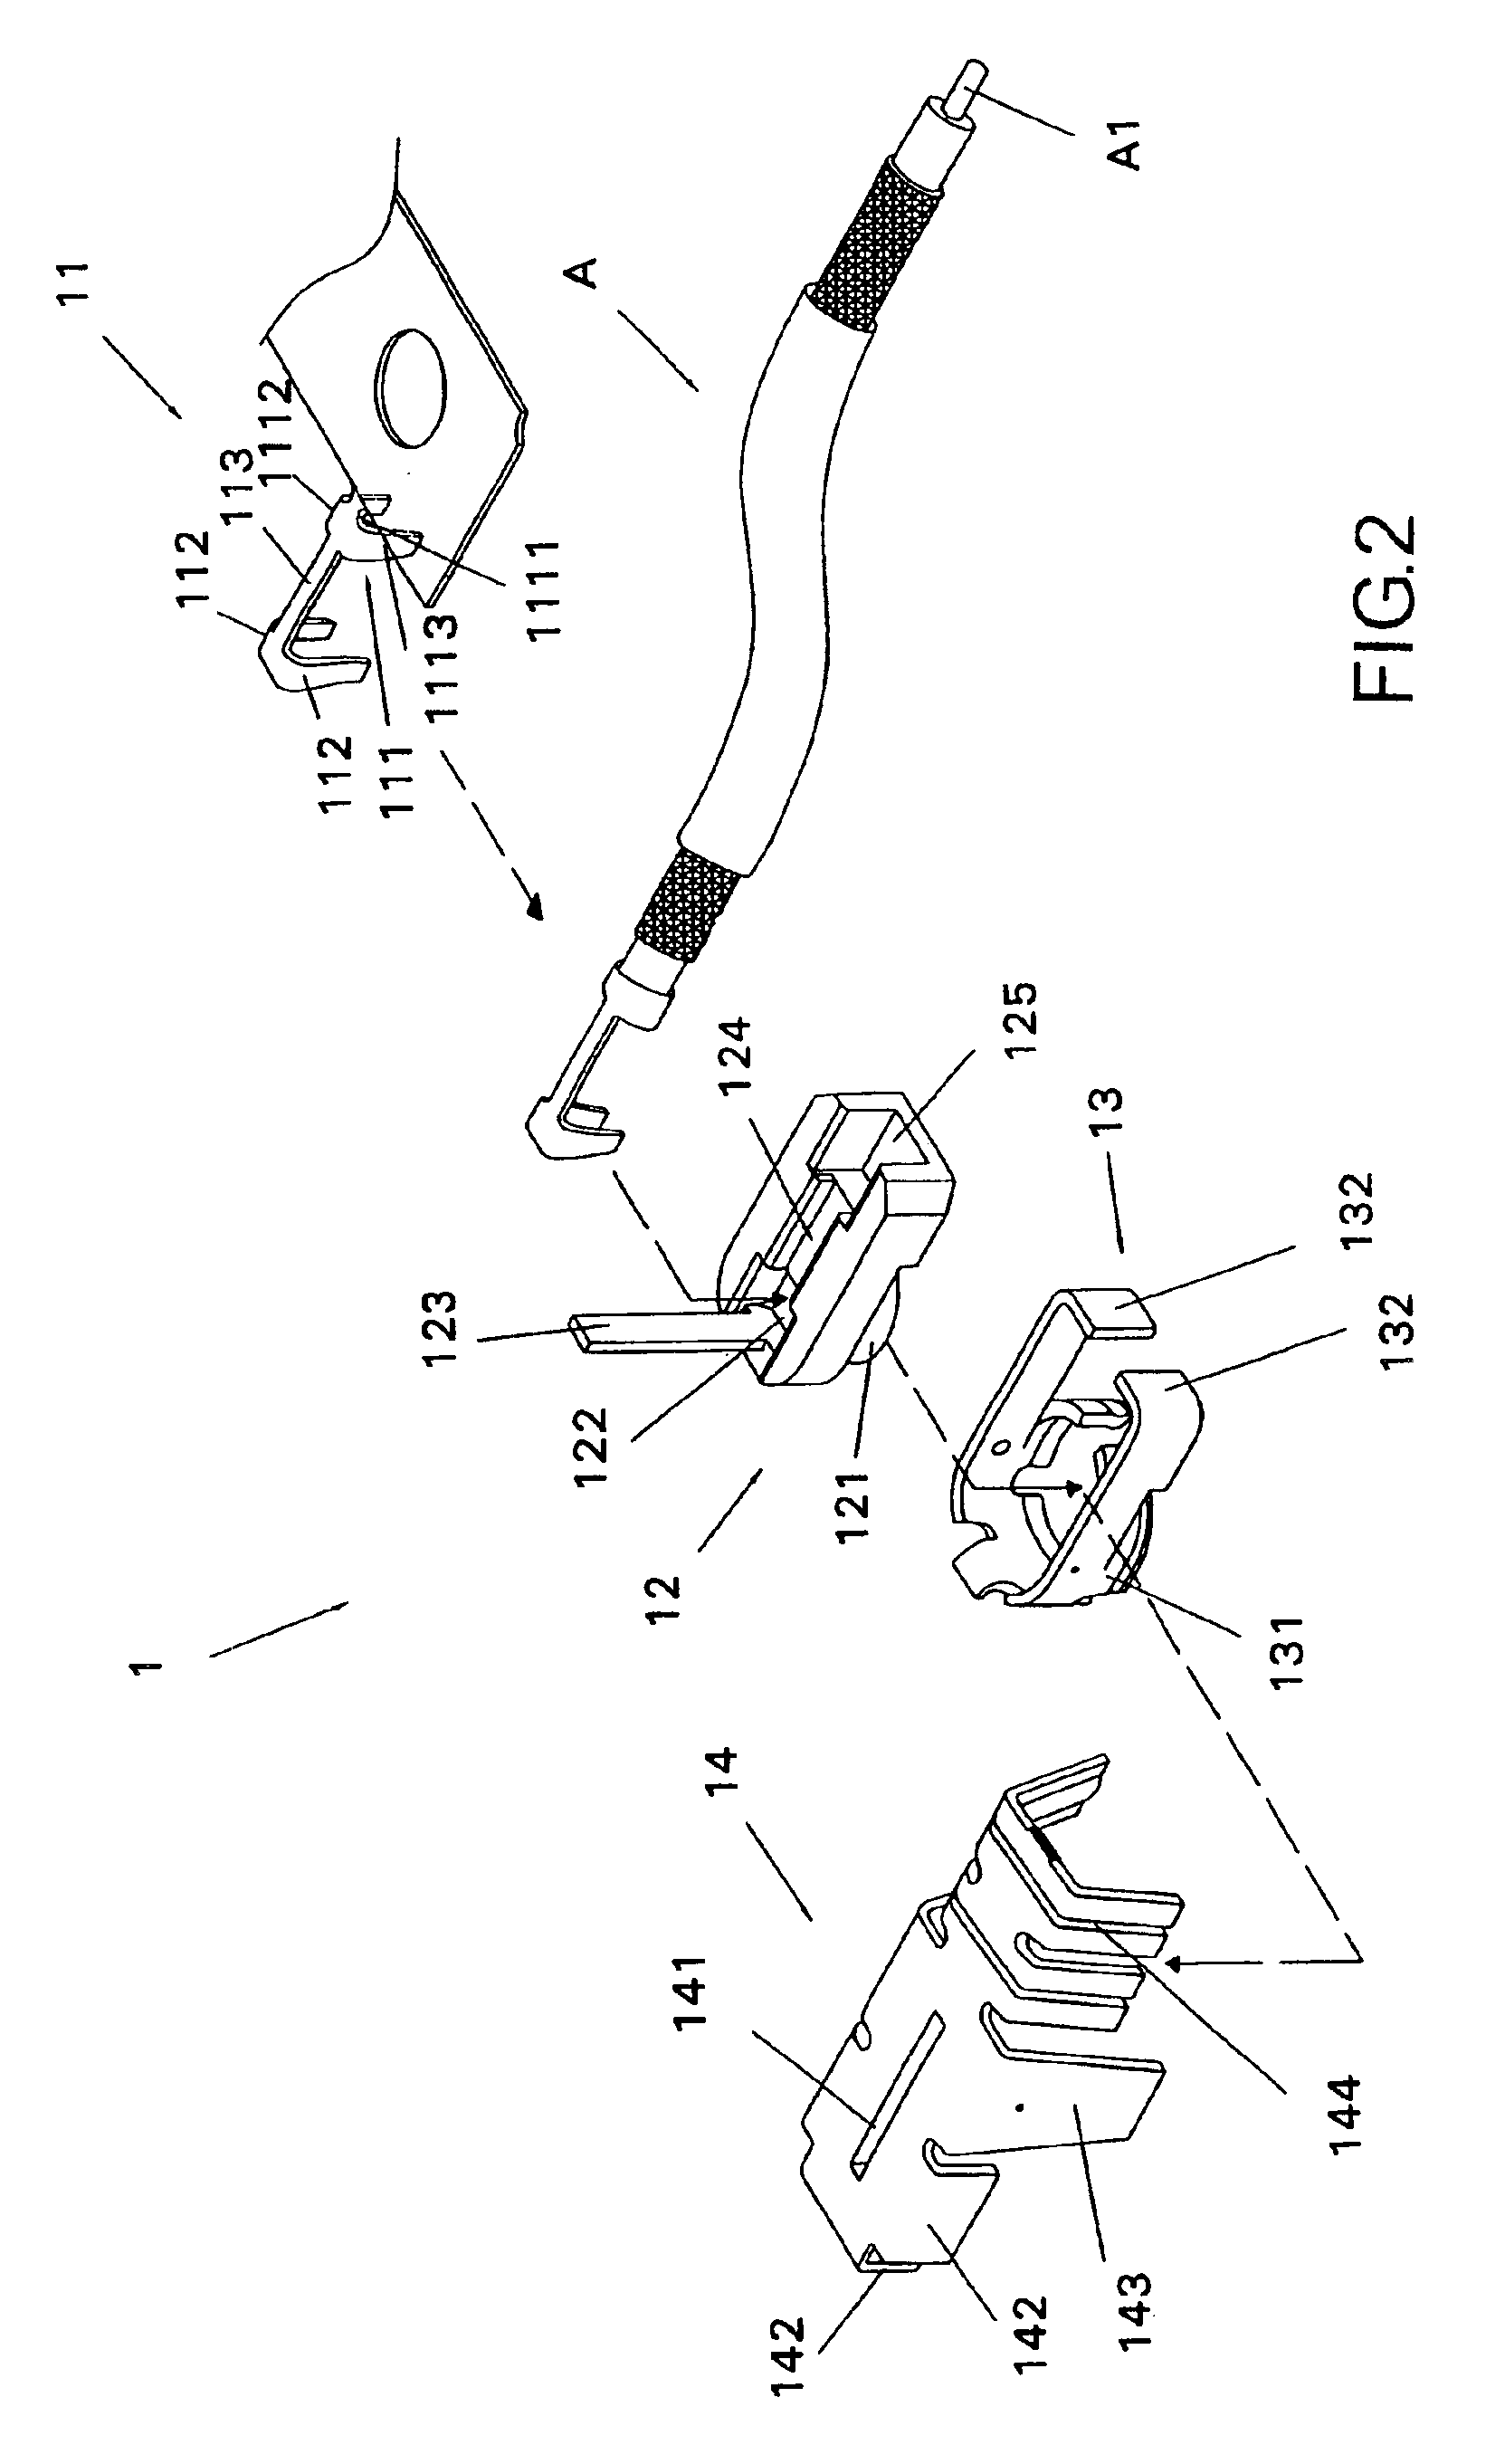 Micro coaxial cable connecting device